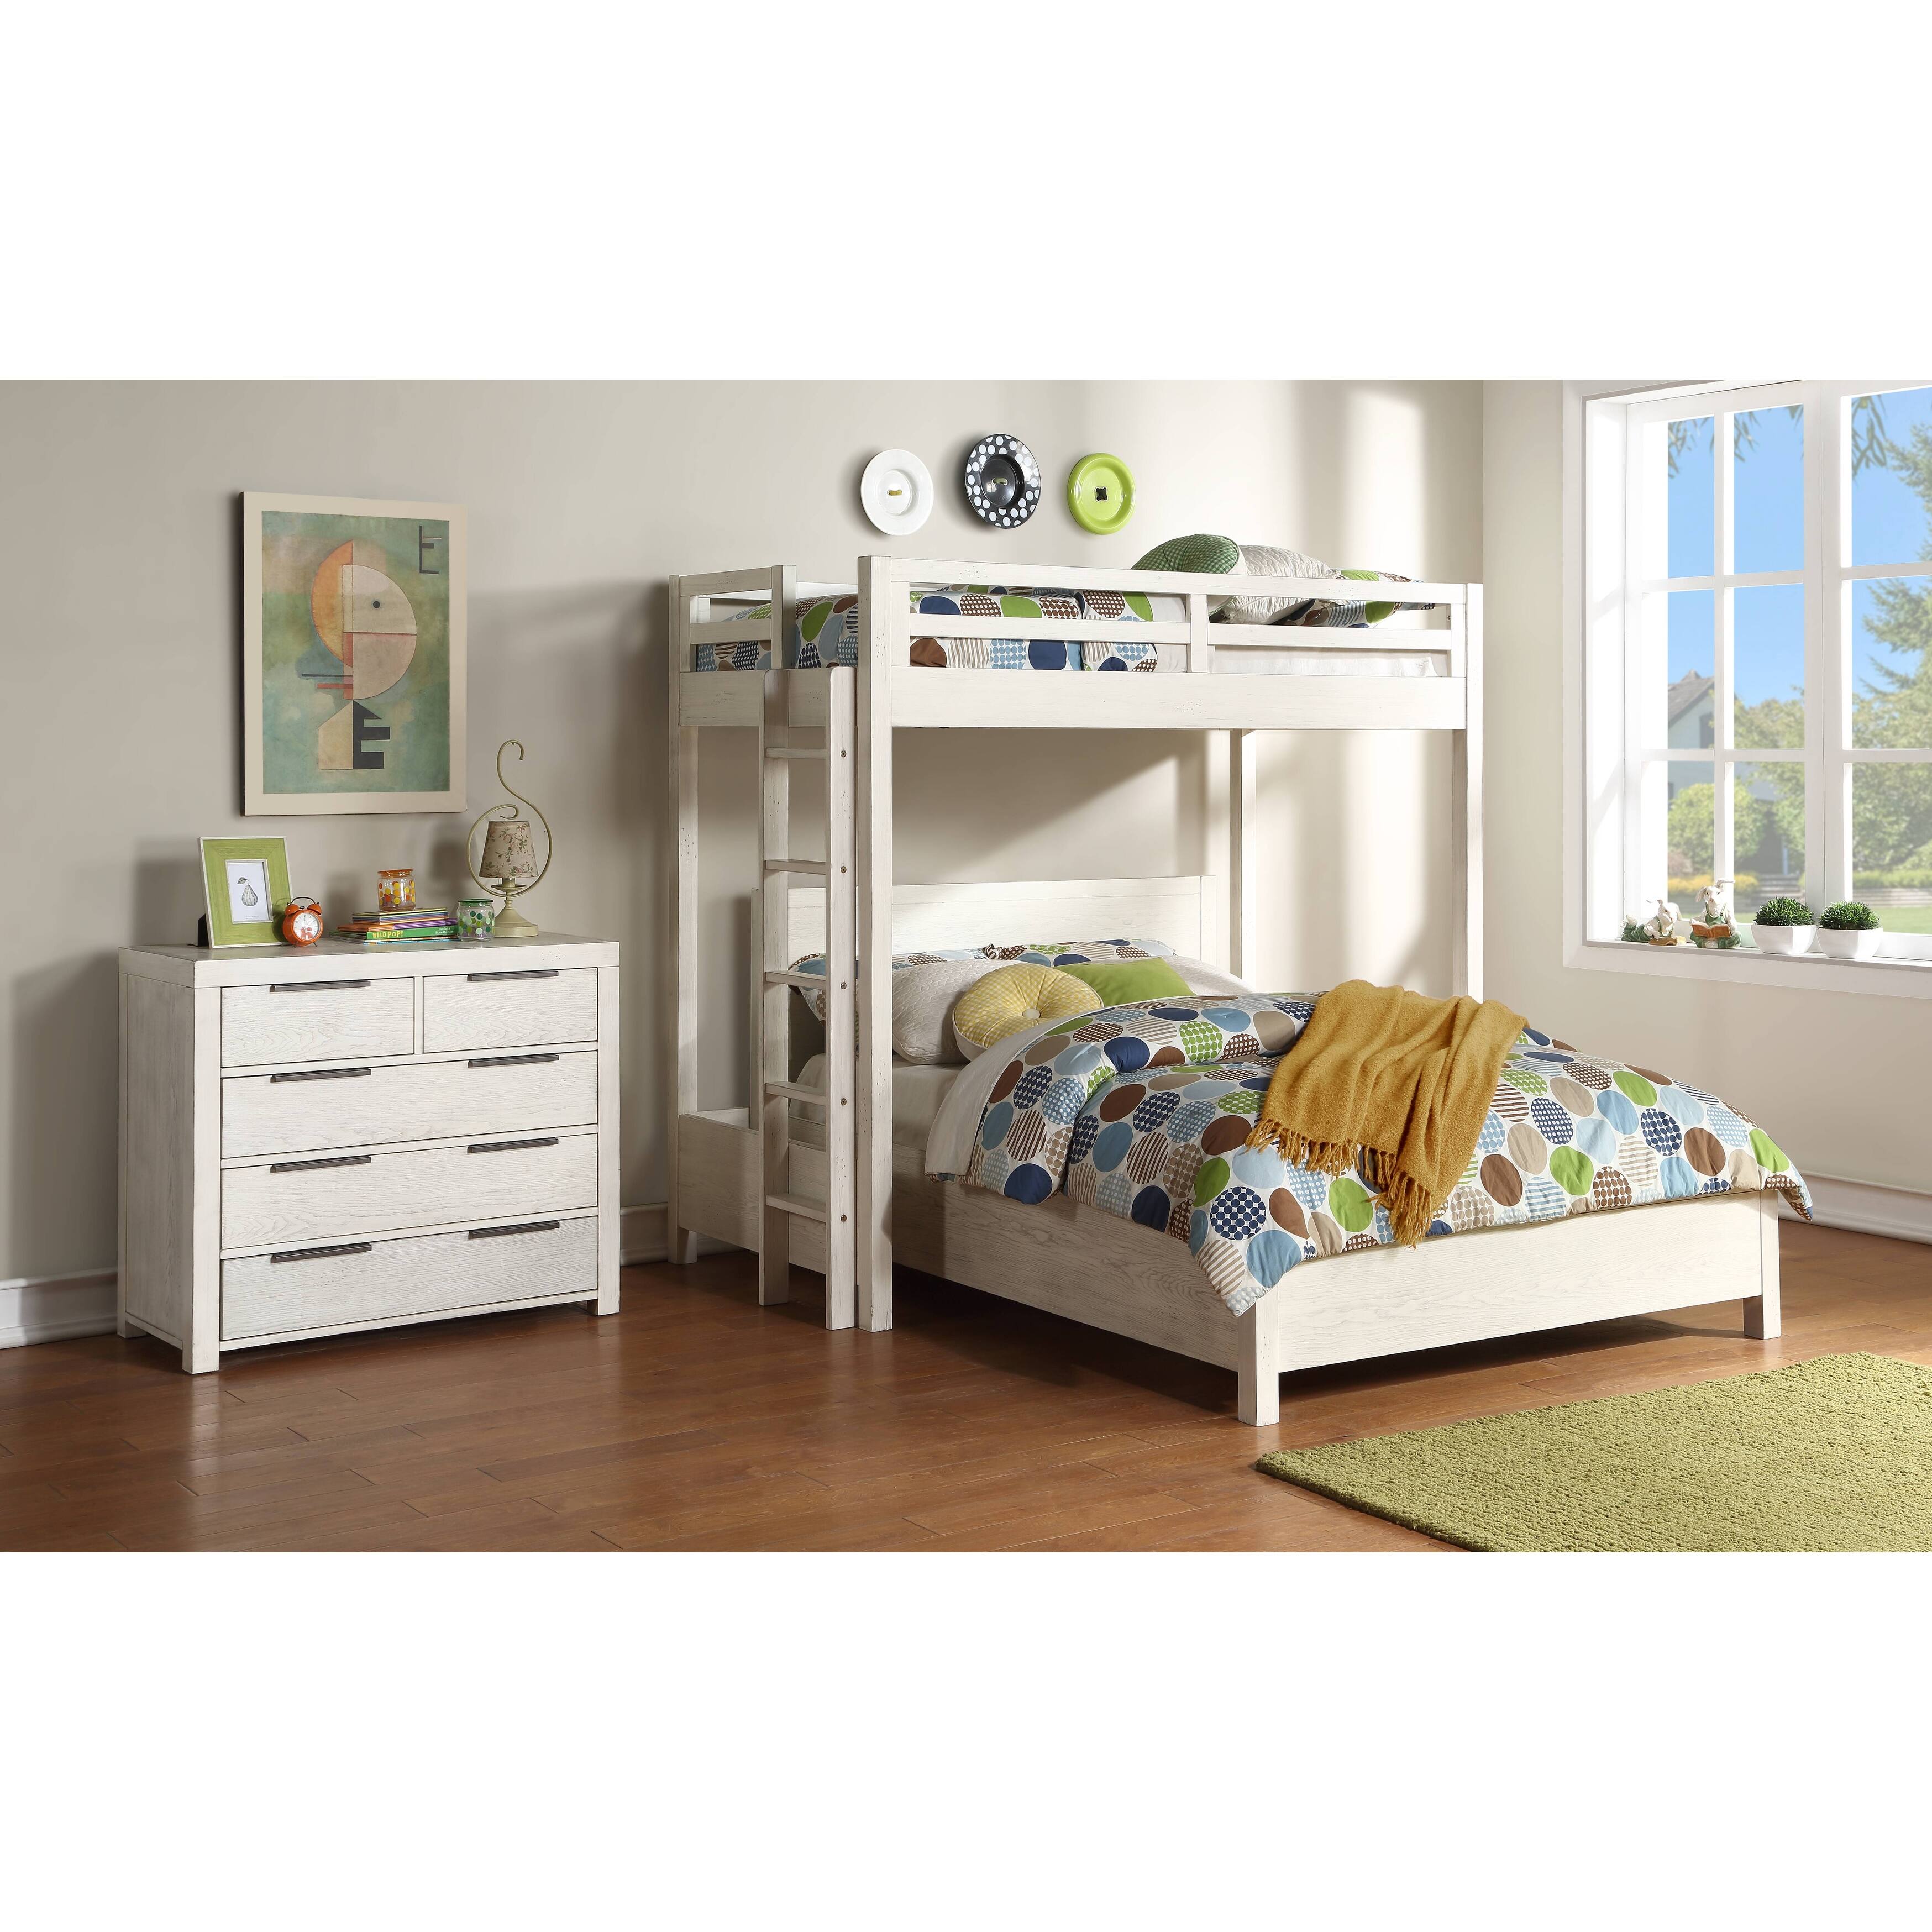 Celerina Twin Loft Bed in Weathered White Finish